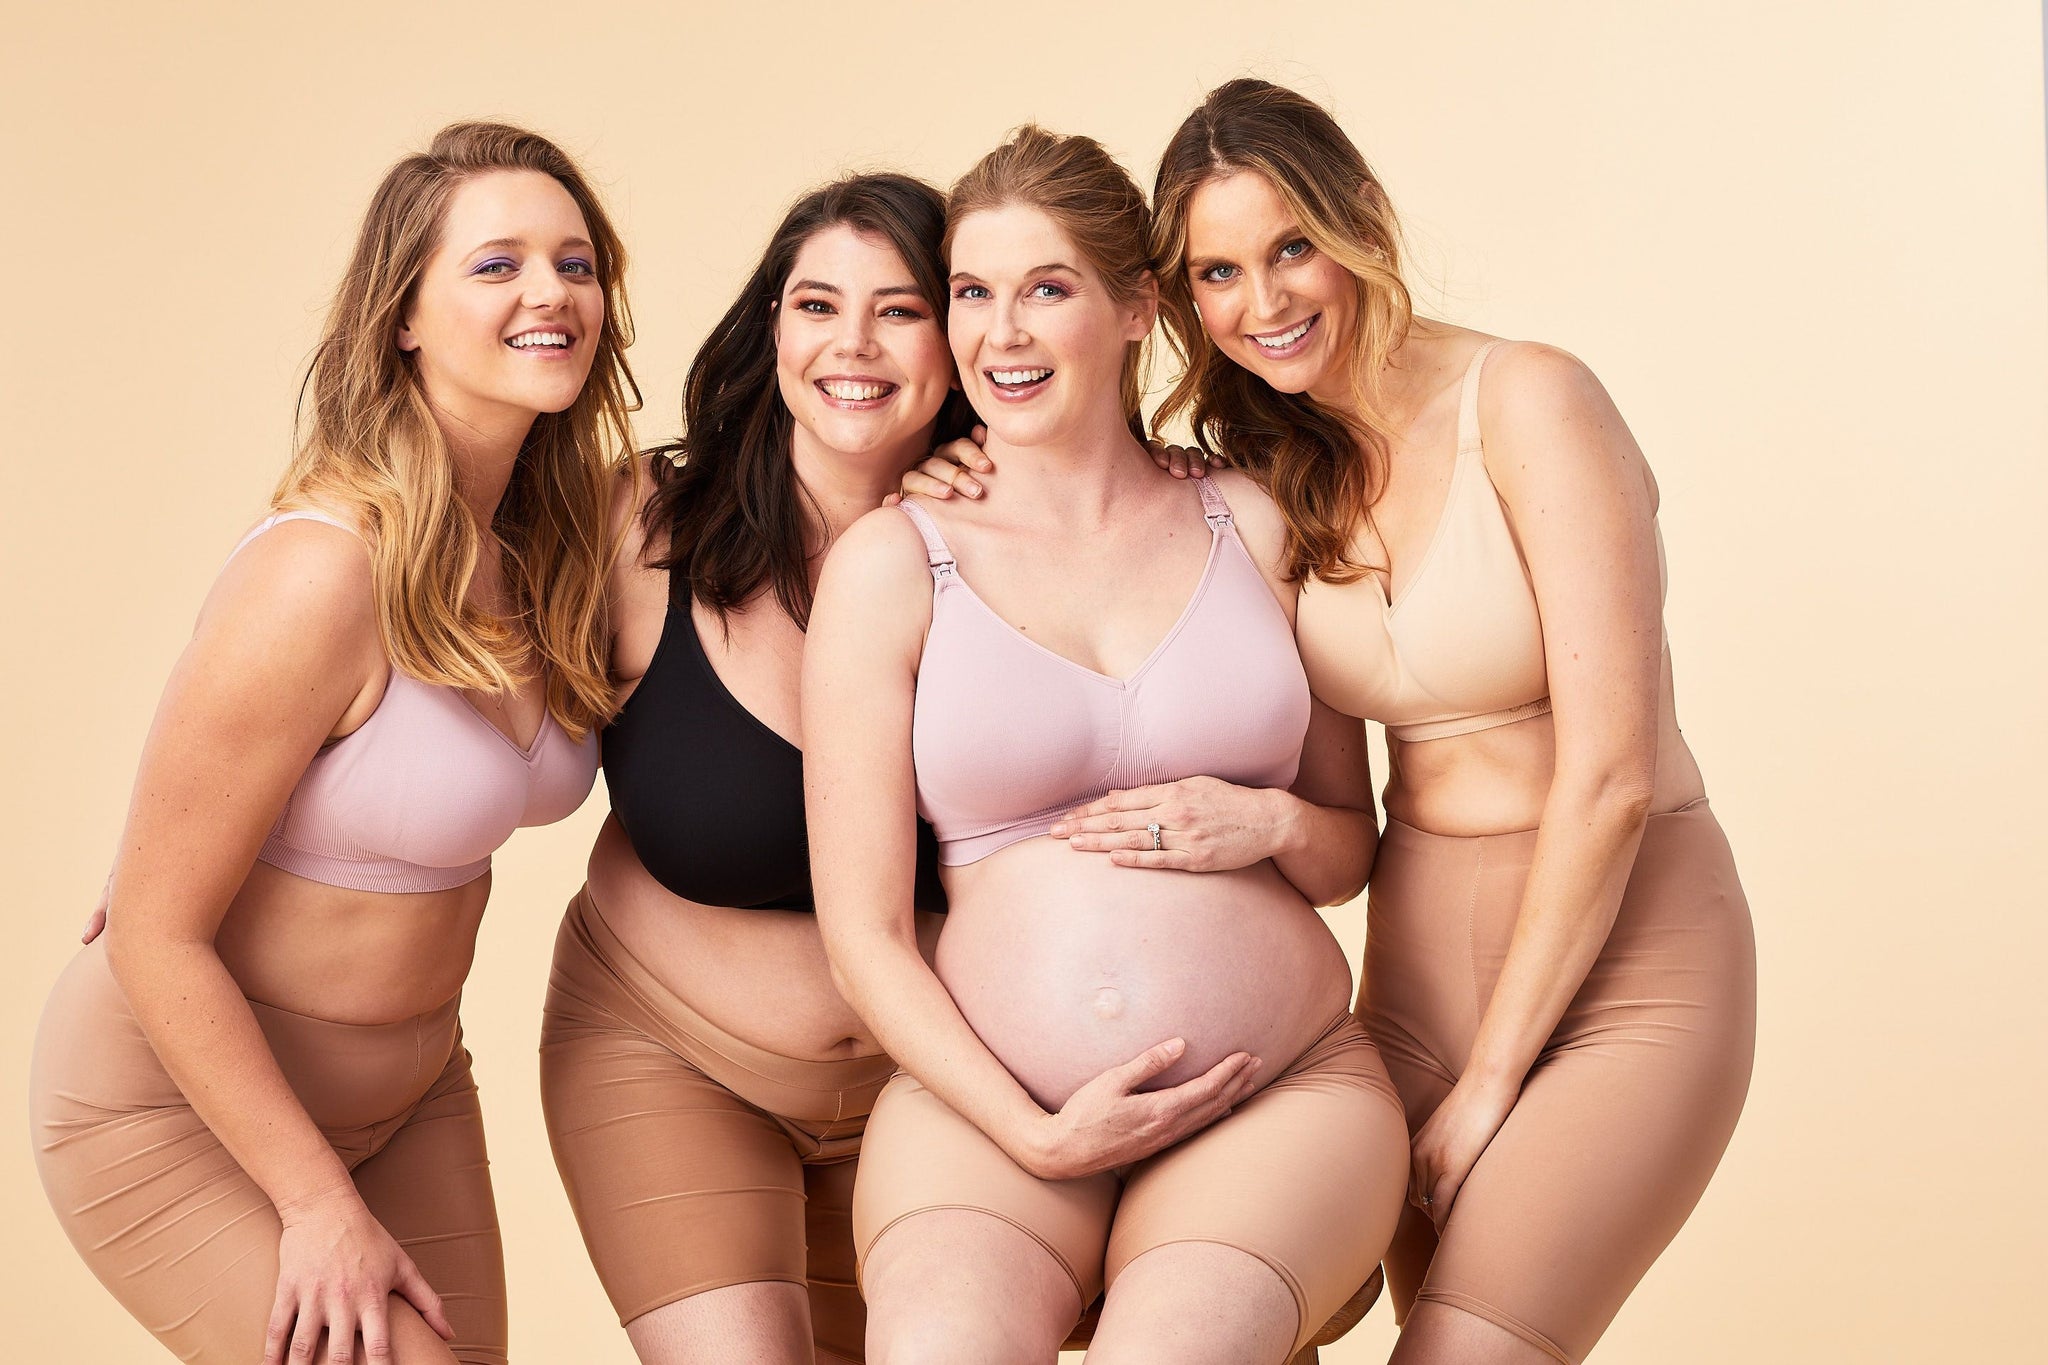 Revealing what you really think of maternity bras